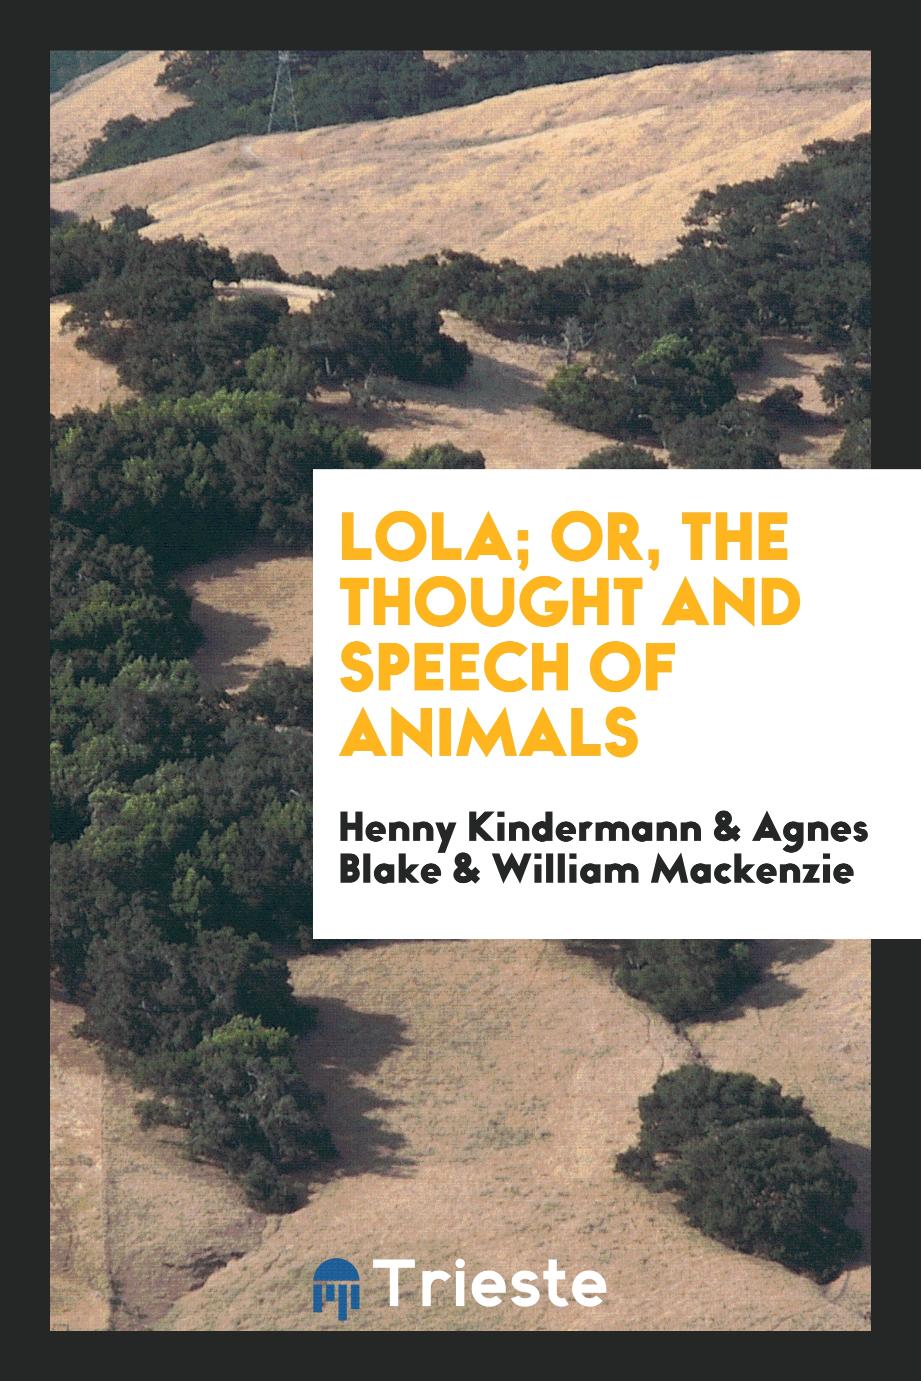 Lola; or, The thought and speech of animals